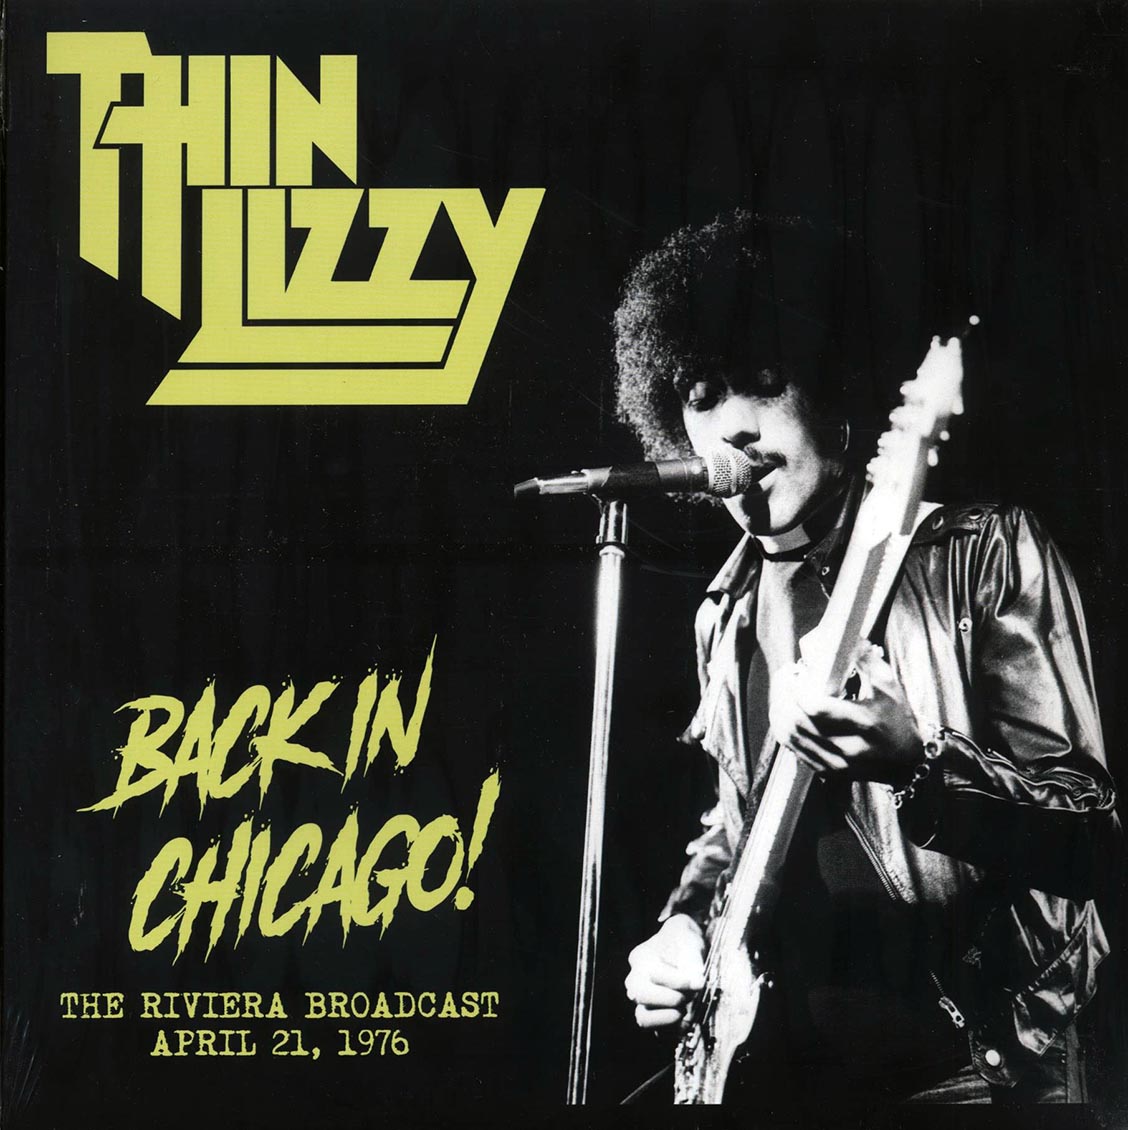 Thin Lizzy "Back In Chicago! The Riviera Broadcast April 21, 1976" LP